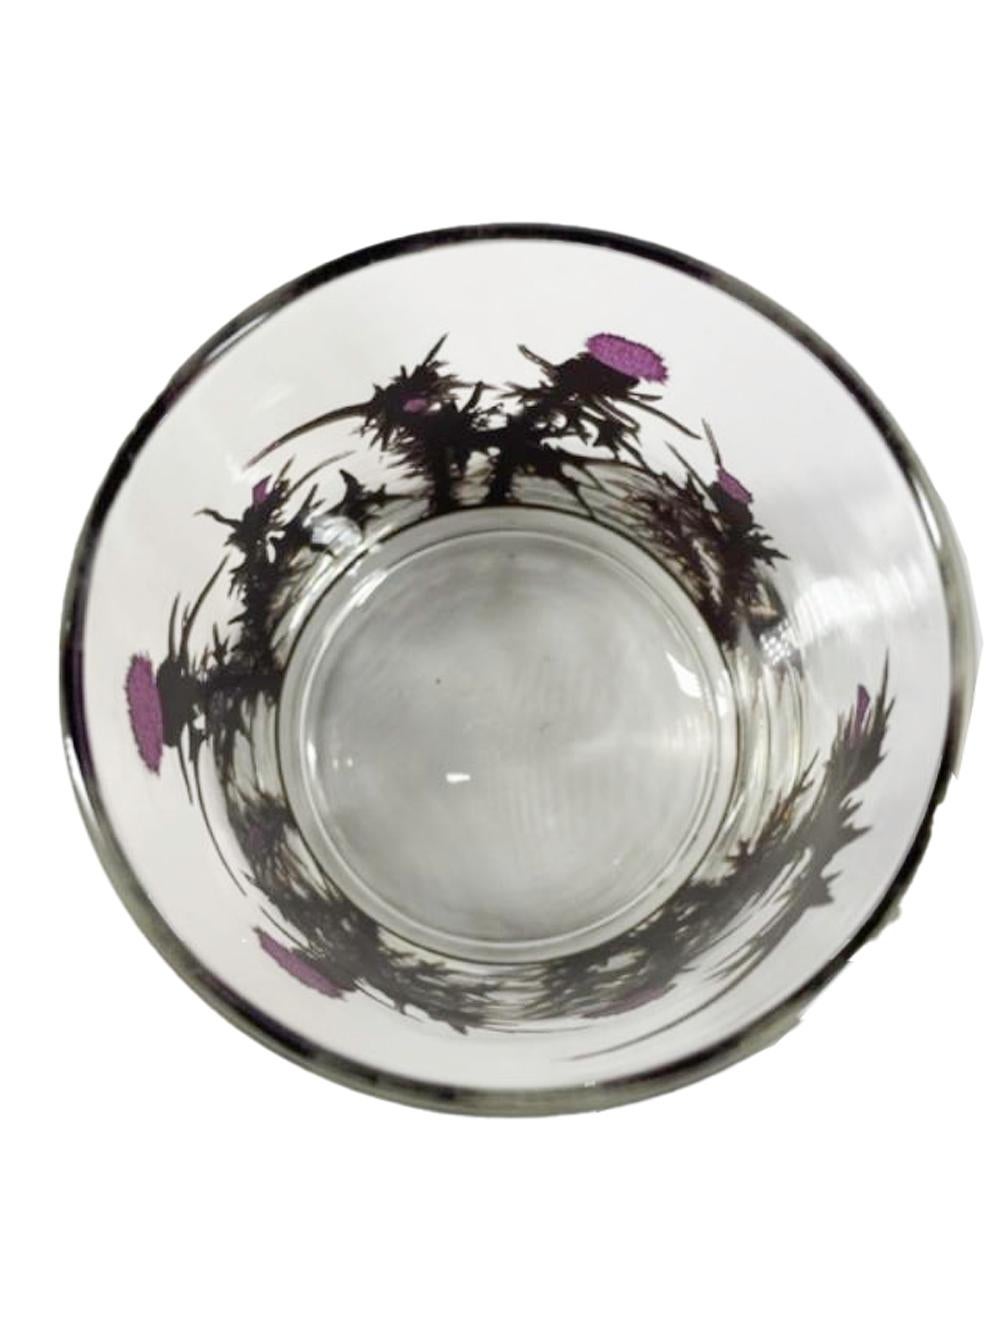 Set of four rocks glasses designed by Gregory Duncan for West Verginia Glass having thistles in raised translucent purple enamel and with 22 karat gold covering the enamel except for the flower top, leaving the enamel only visible on the interior of